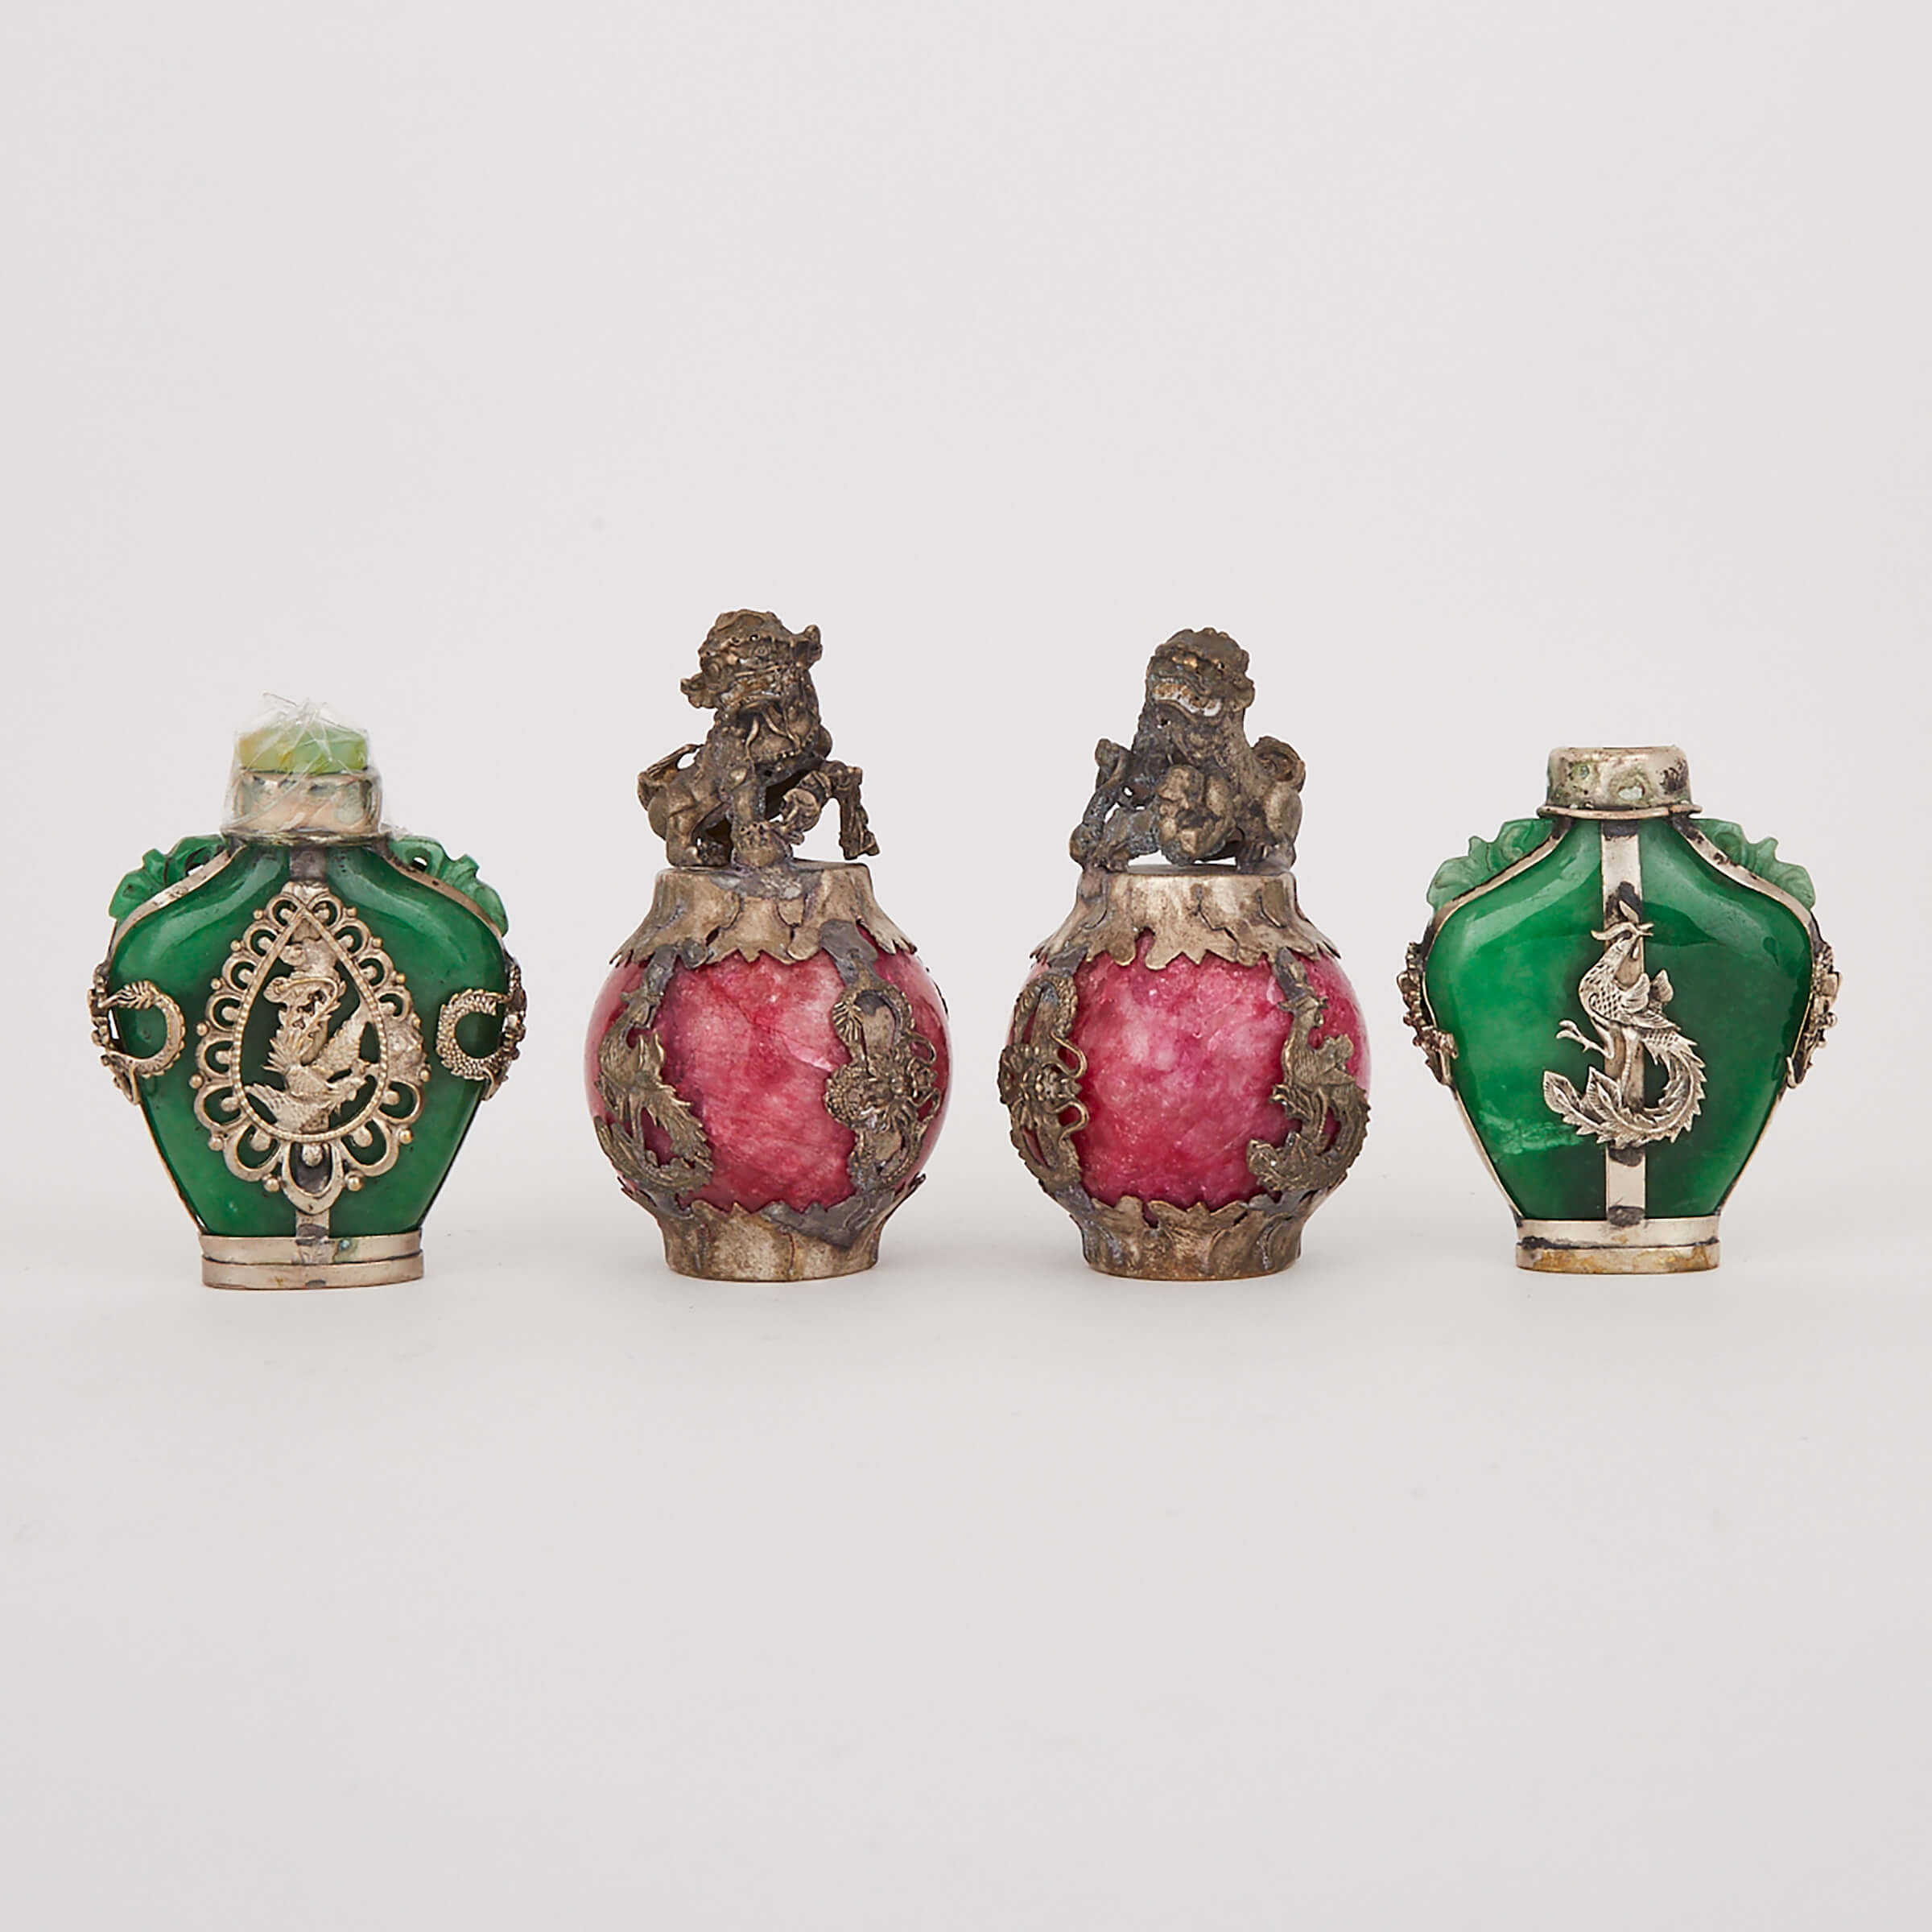 A Group of Four Silver Mounted Baubles